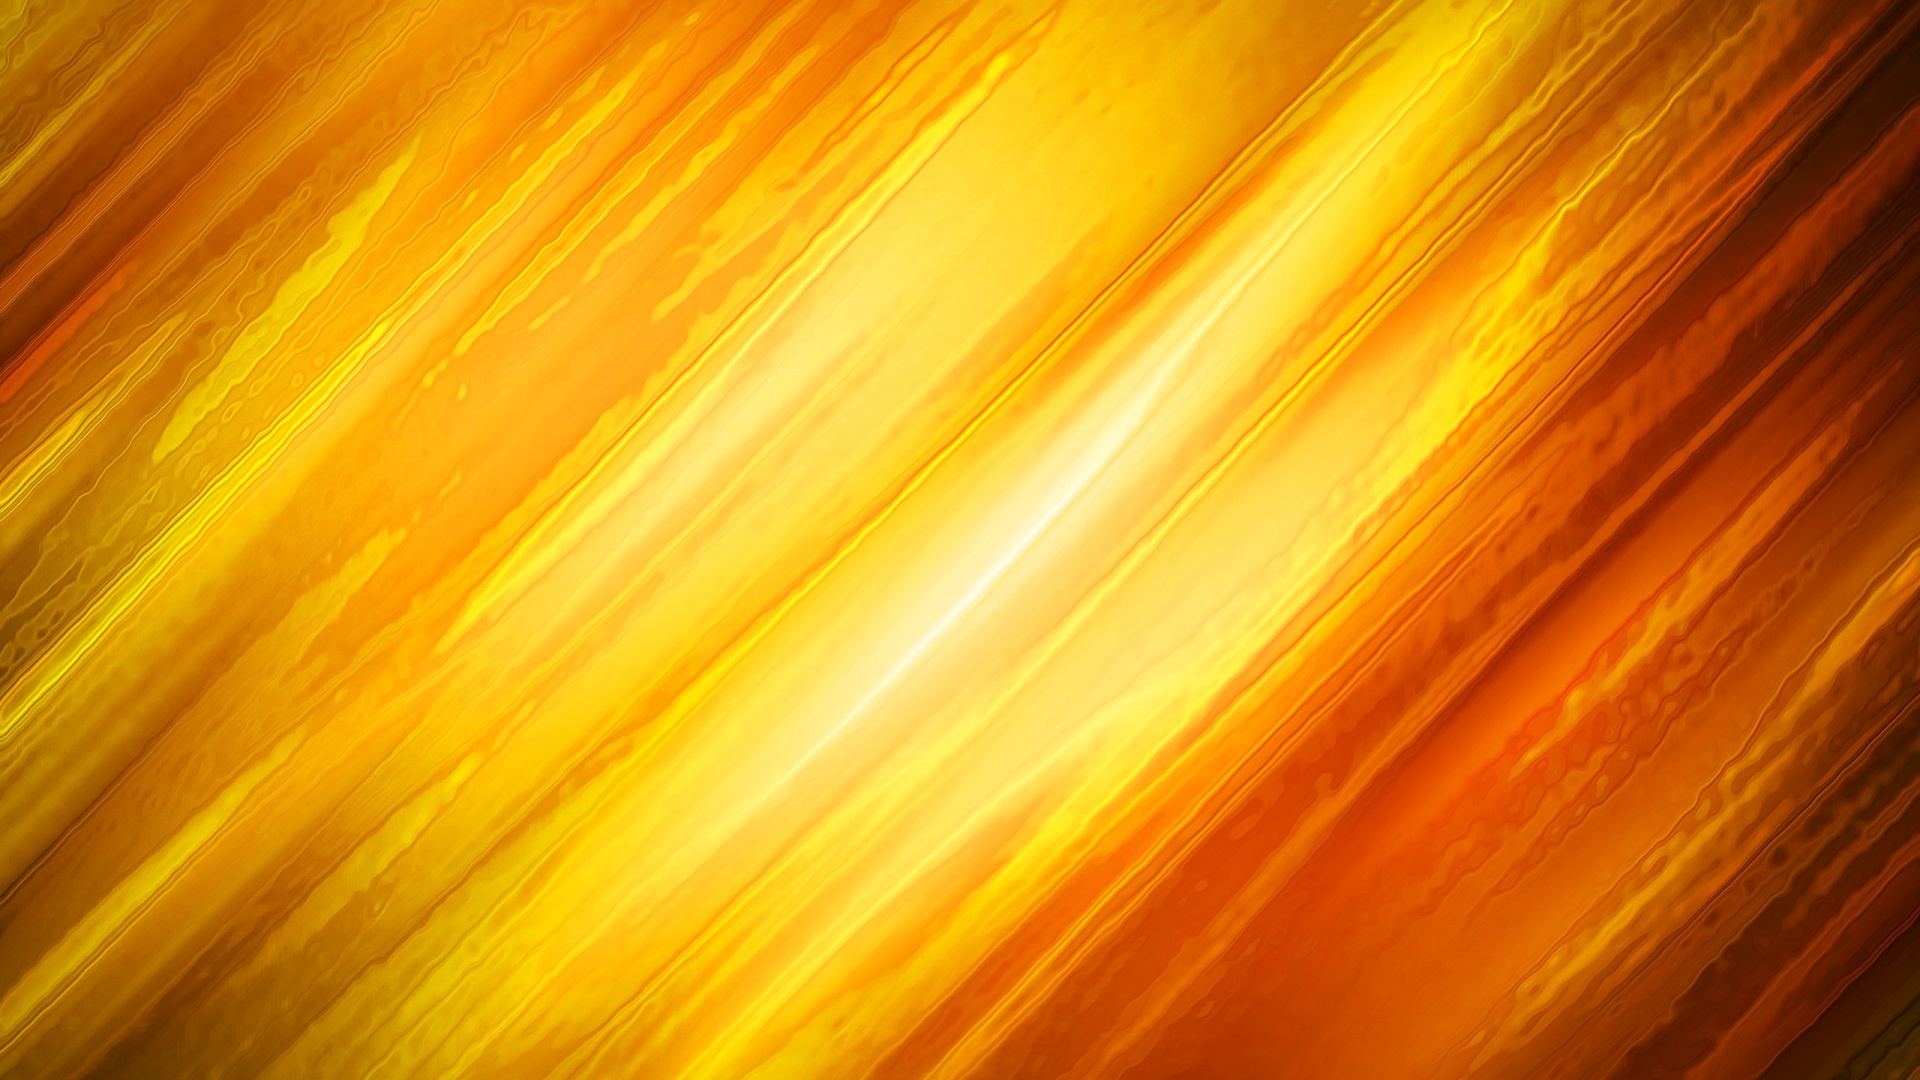 wallpapers background orange yellow abstract 1920x1080